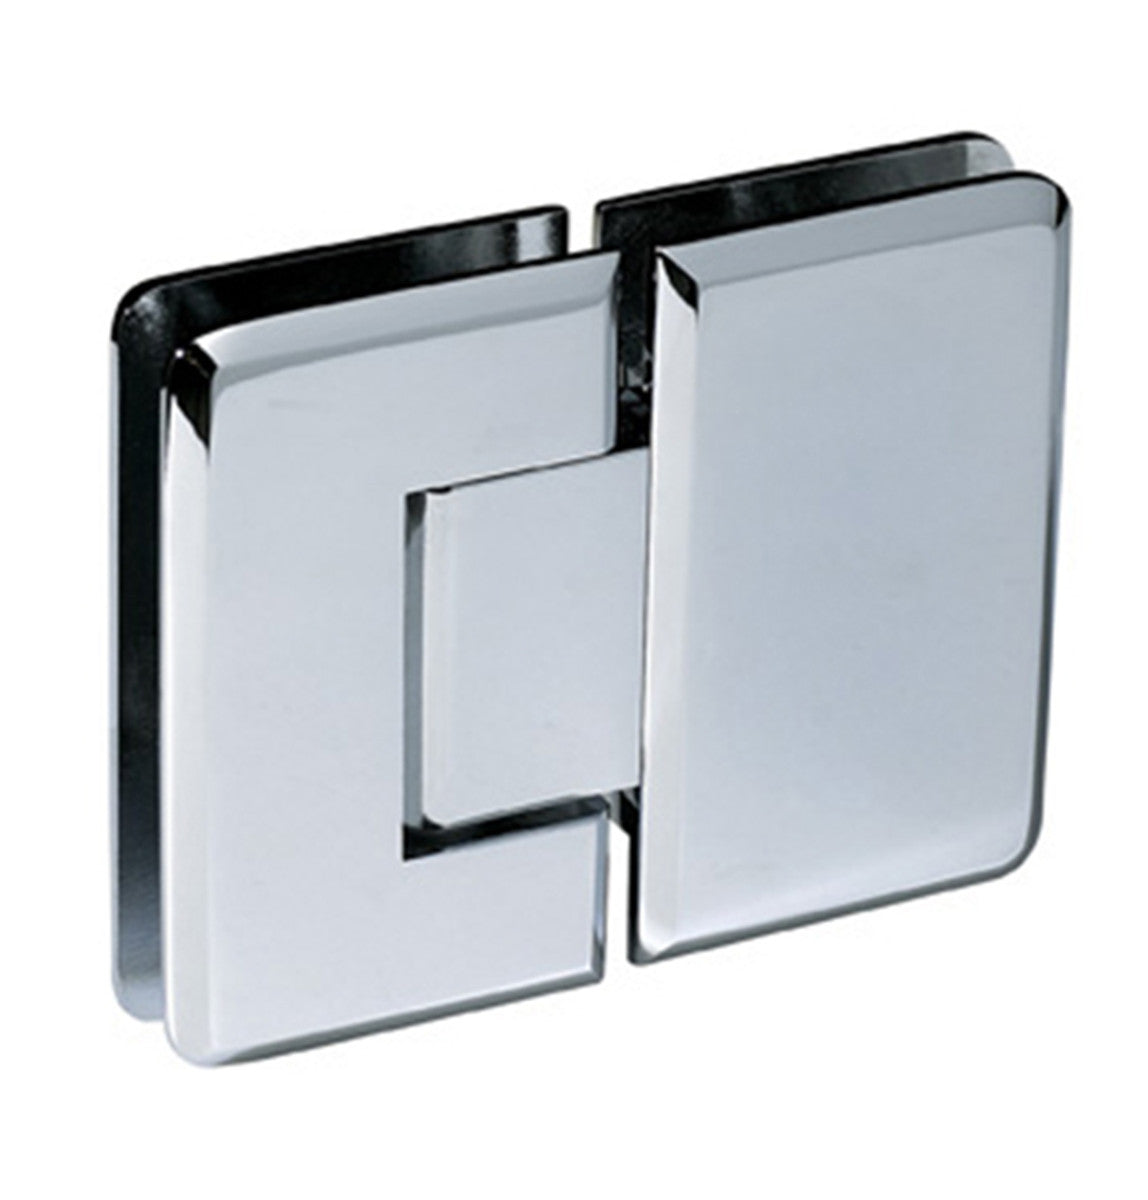 Oceana Heavy Duty 180° Glass-Glass Hinge with 5° Offset